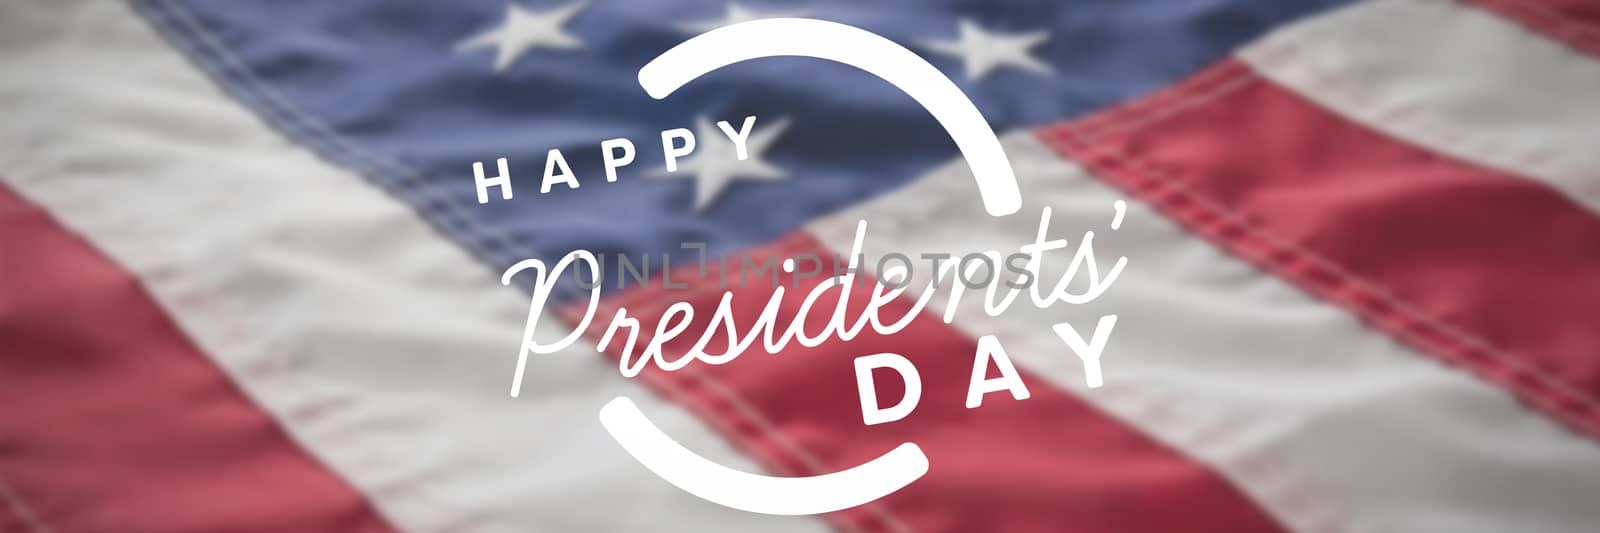 Happy presidents day. Vector typography against close-up of cropped american flag